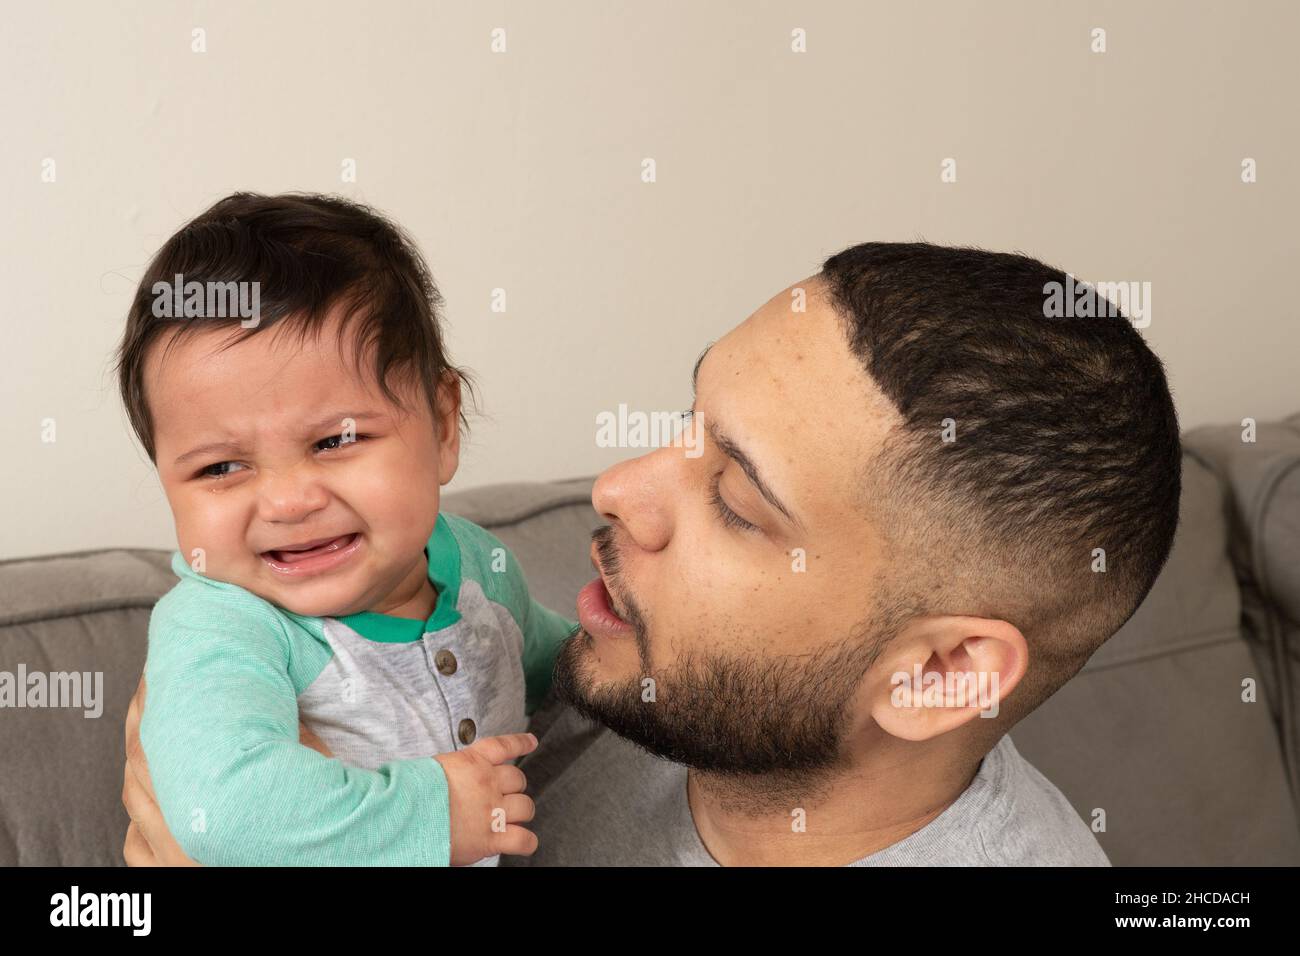 8 month old baby boy, crying, held by father who is trying to comfort him Stock Photo